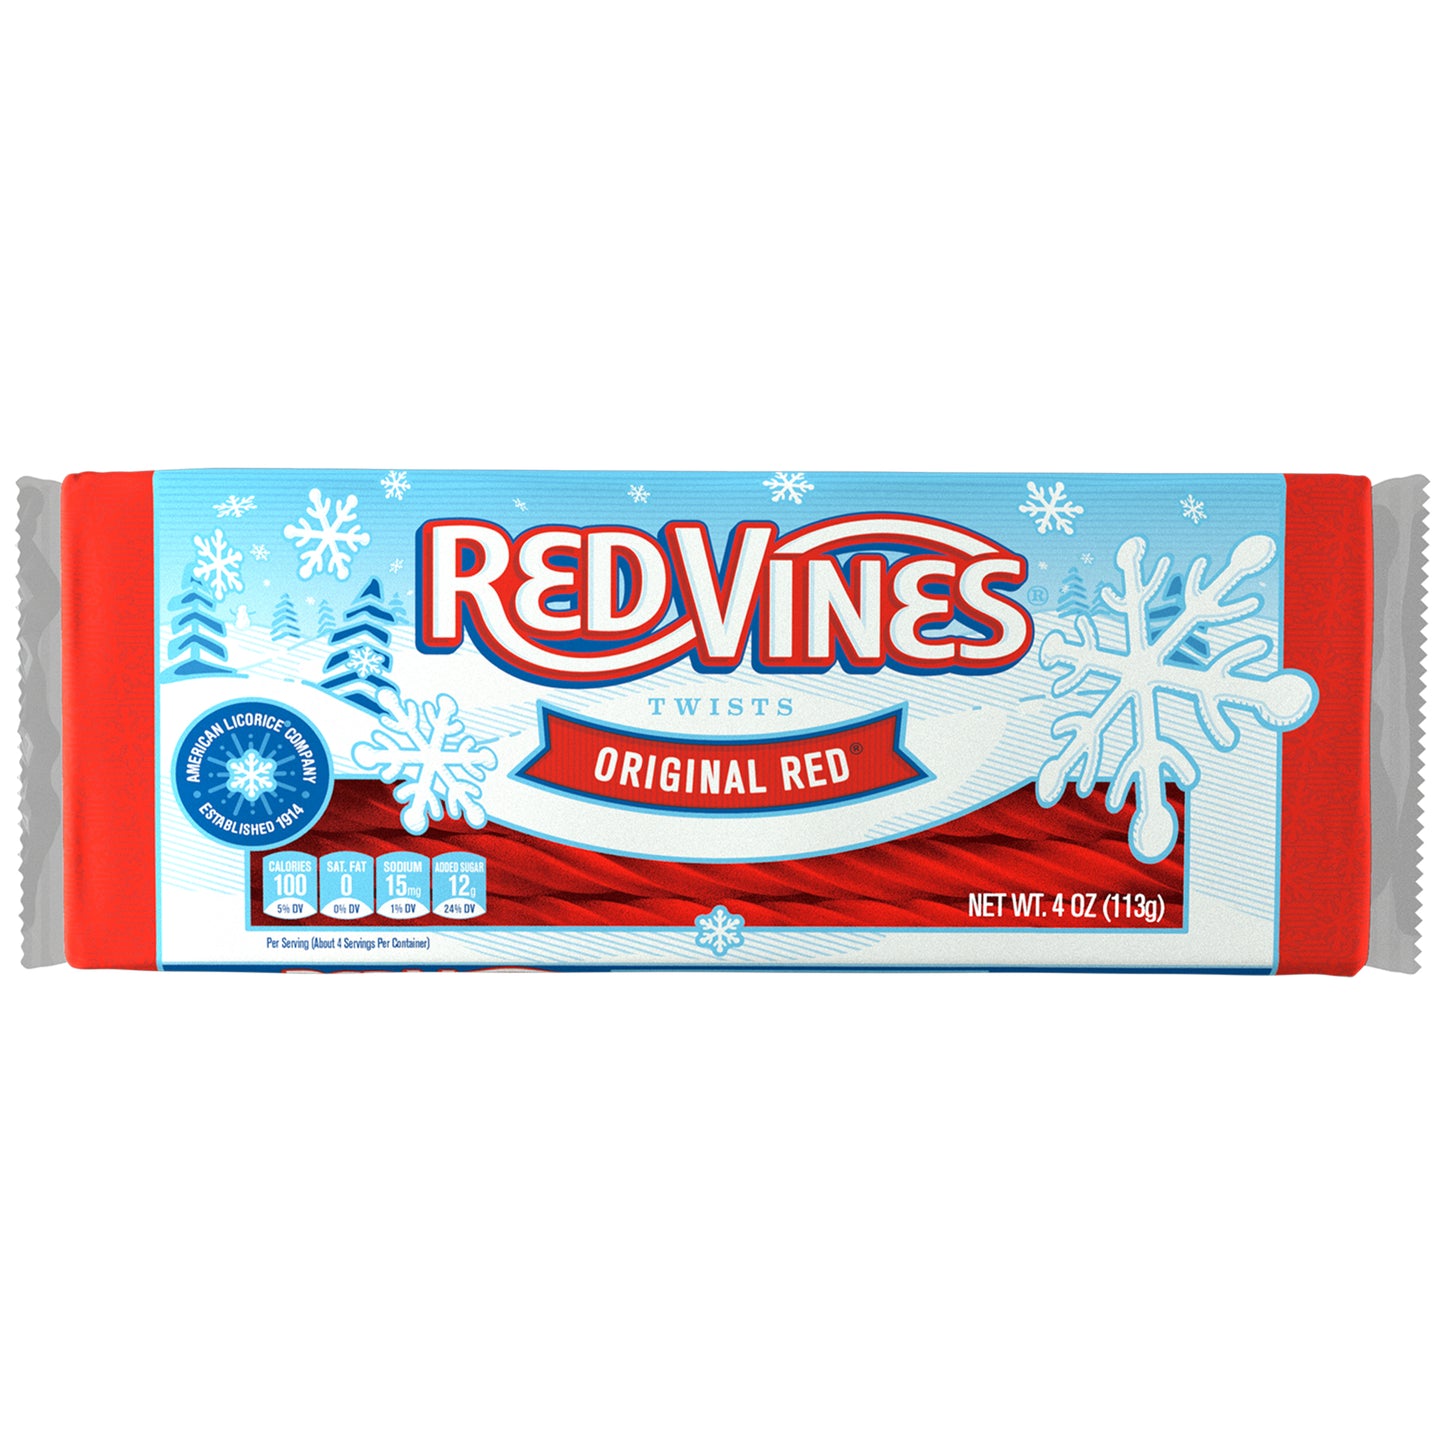 RED VINES Original Red Licorice Twists in winter seasonal tray